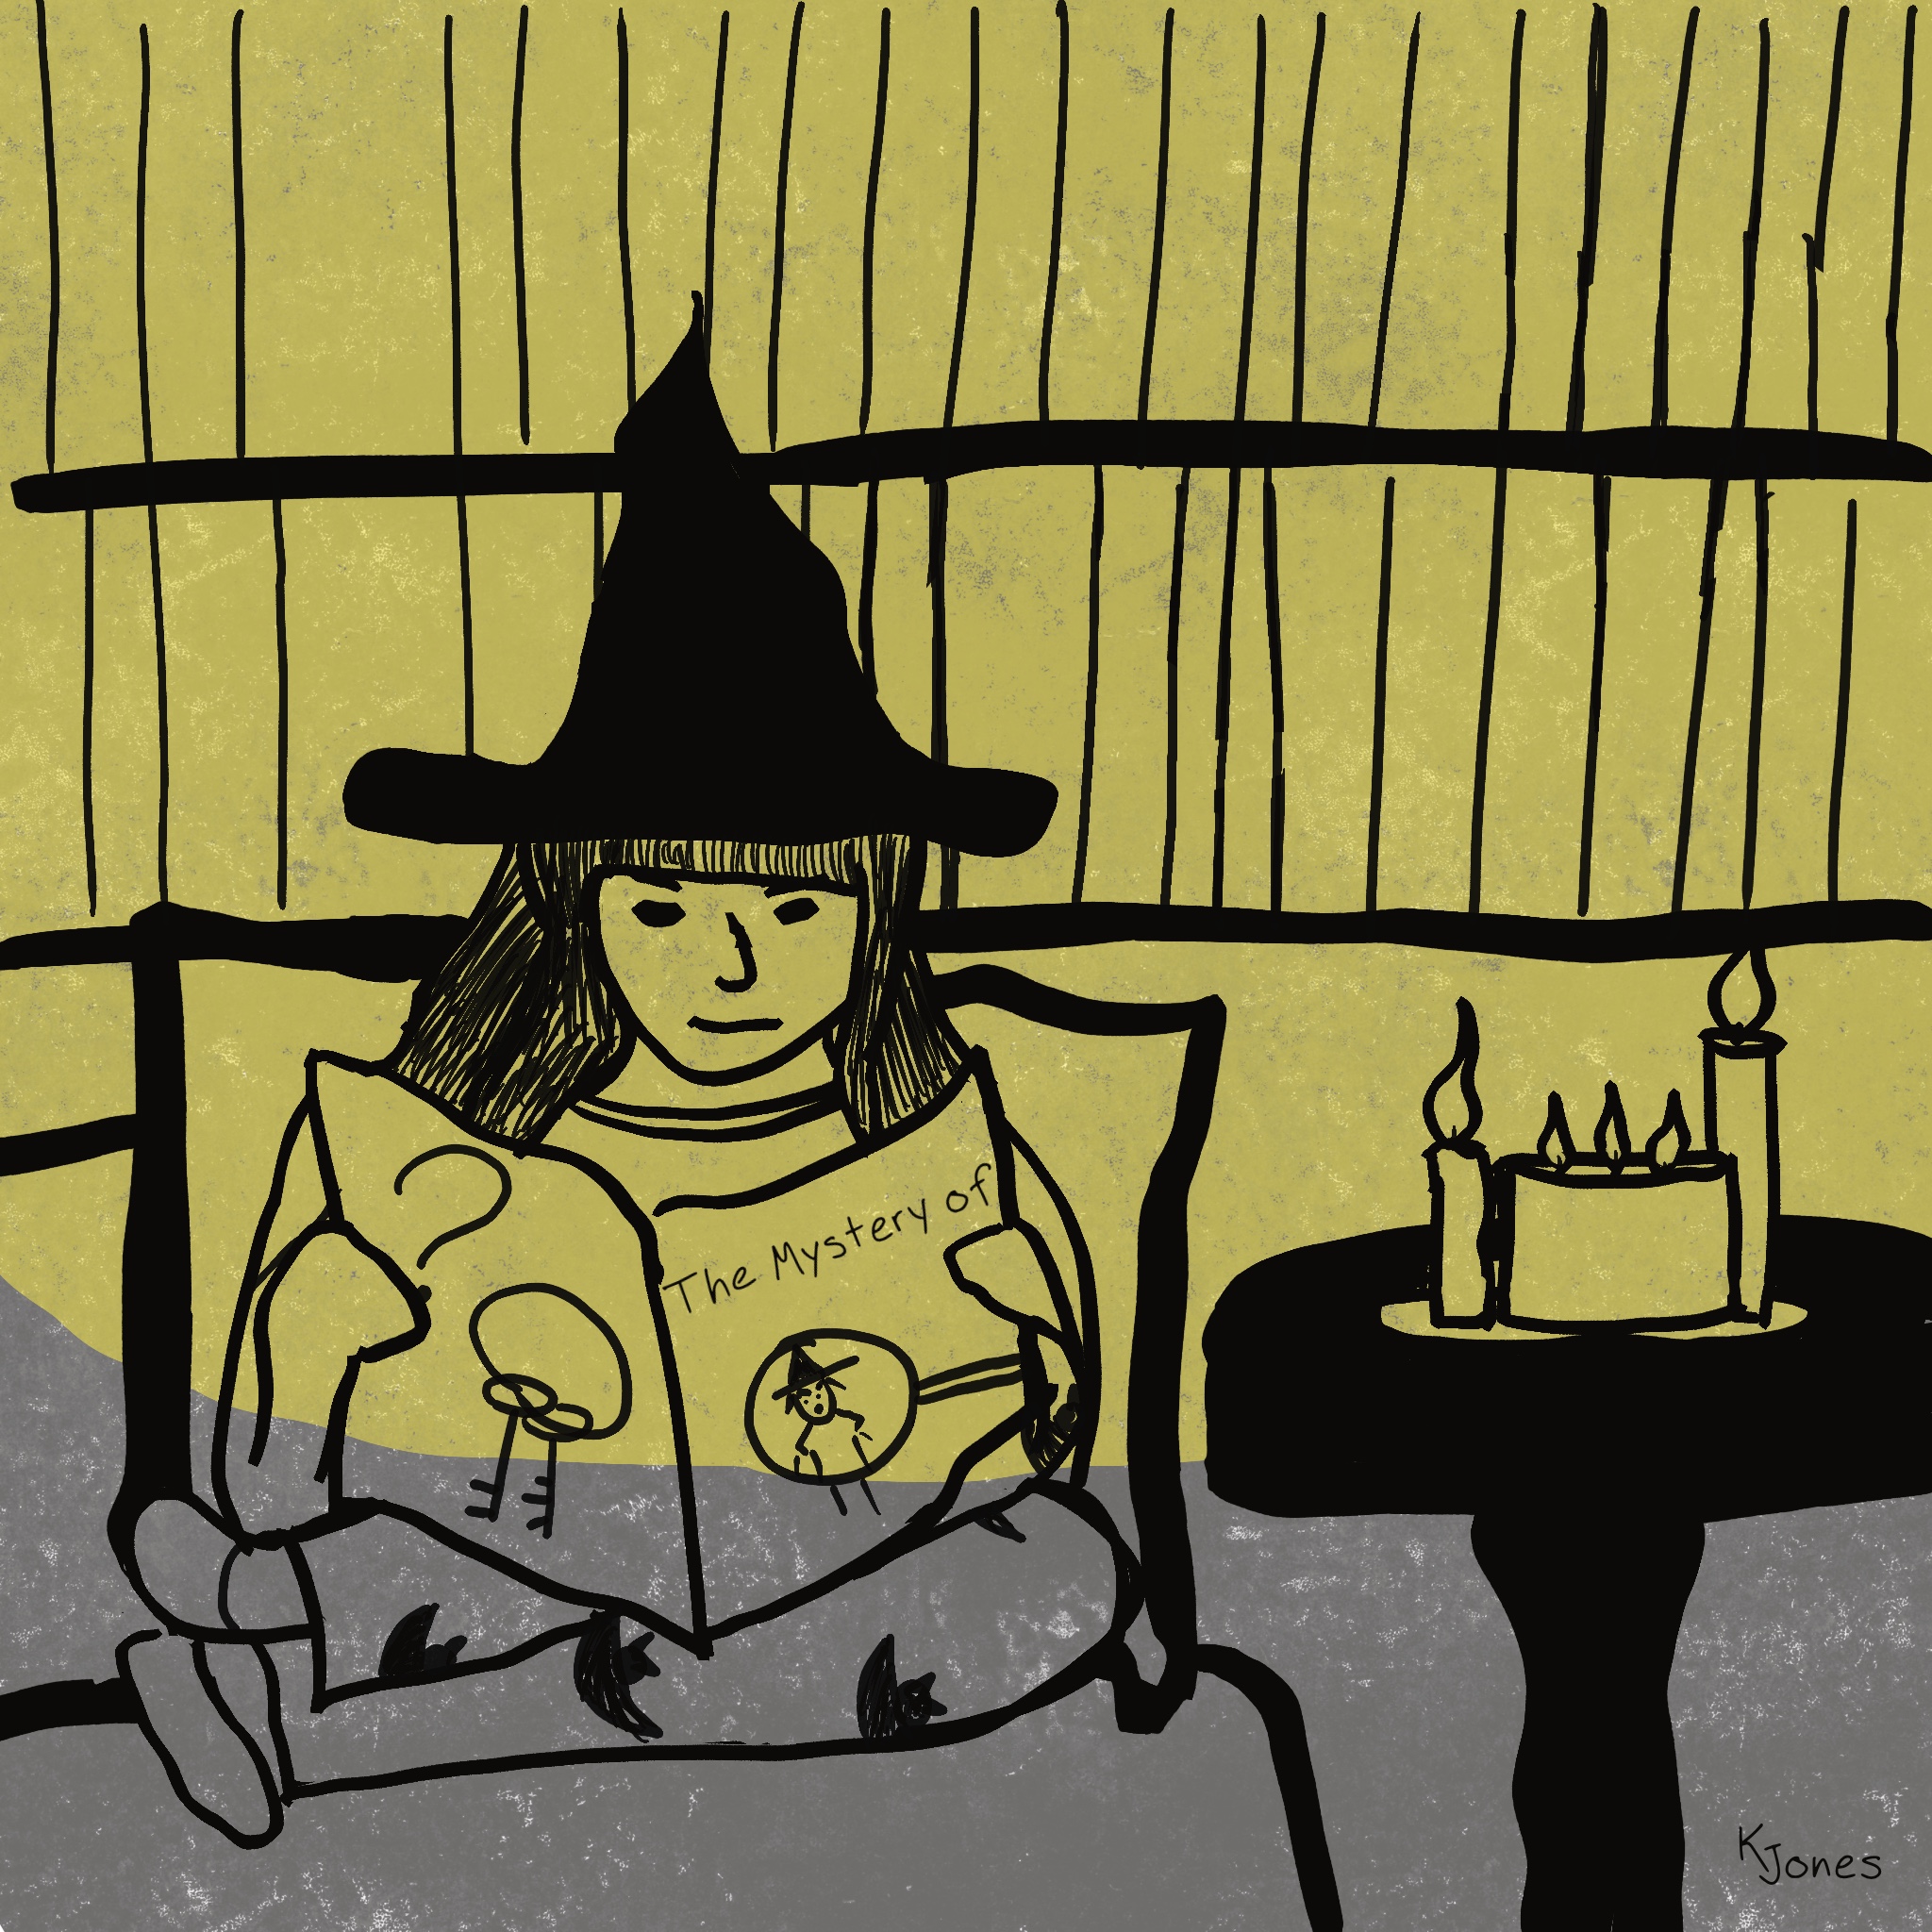 Cartoon drawing with bold black lines of a young witch with long dark hair, wearing a witch hat and pajamas with bats on them. She's curled up on a couch in a home library, reading a comic. She stares intently at the page, eyebrows furrowed. Three candles burn on the table next to her, adding a yellow glow. The comic's cover shows a witch through a magnifying glass on the front, with text reading: The Mystery of. The back shows a question mark and a key ring with two skeleton keys.